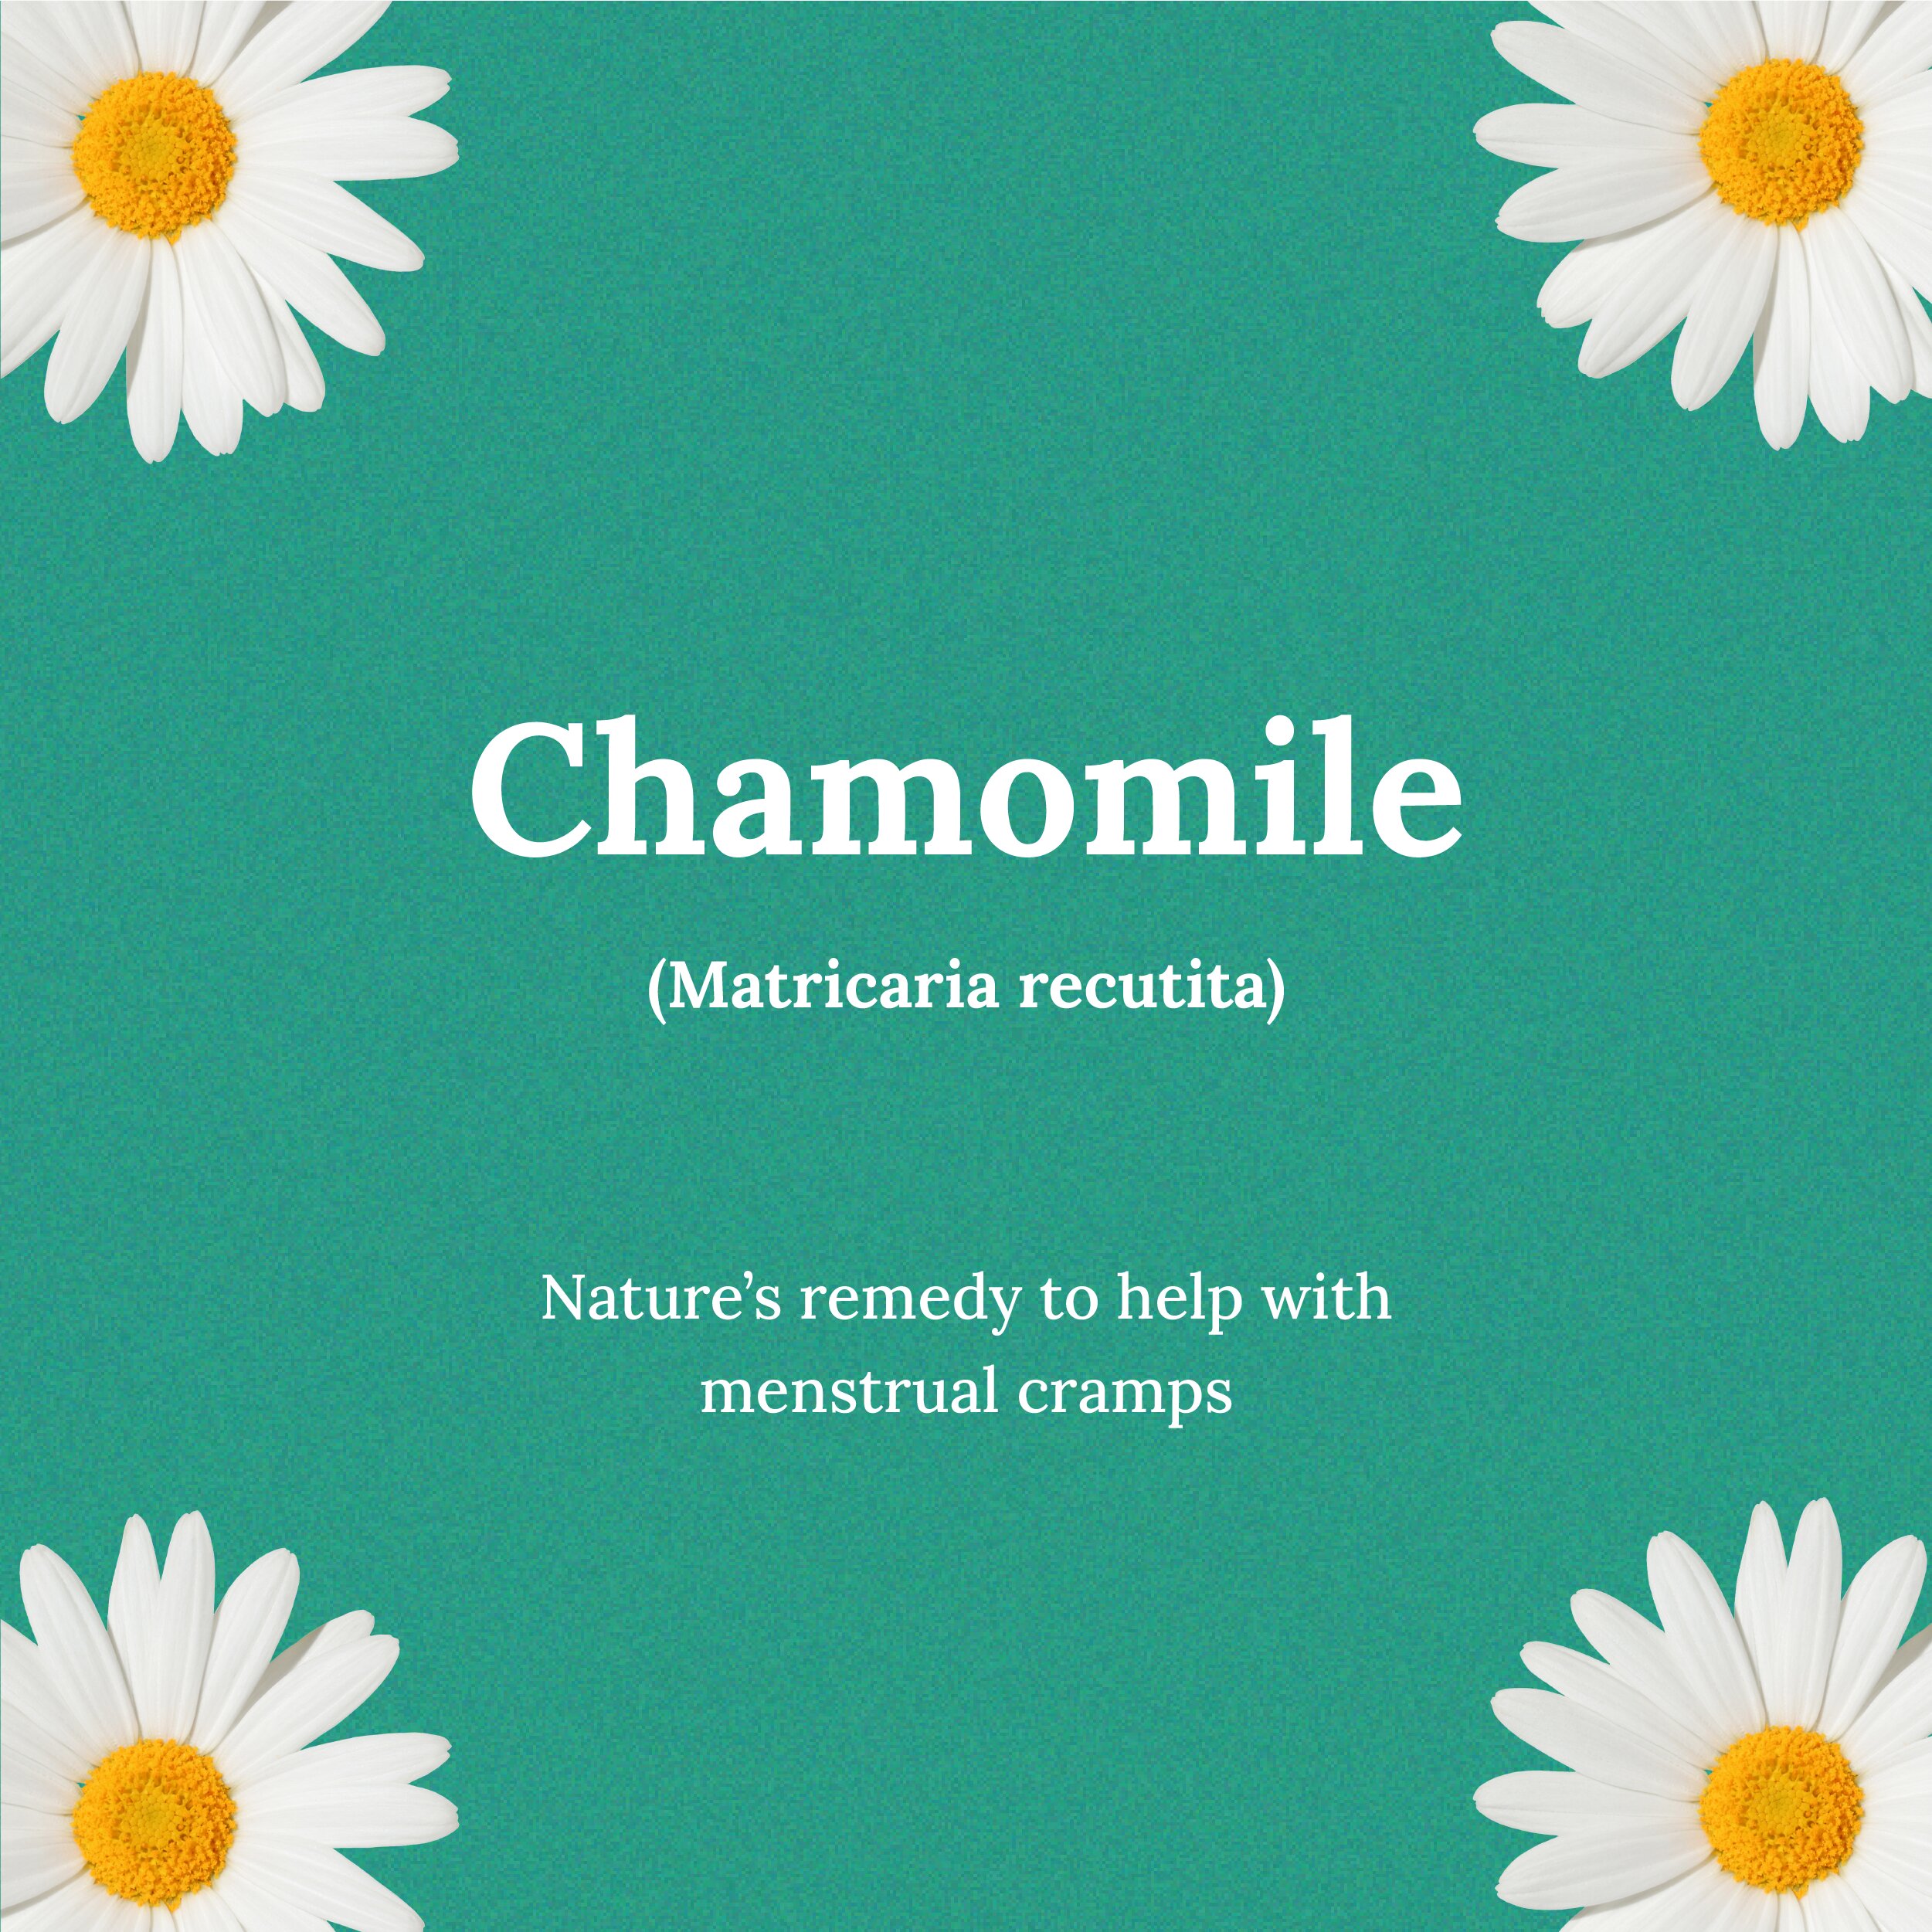 Flat infographic illustration about Chamomile. Green background